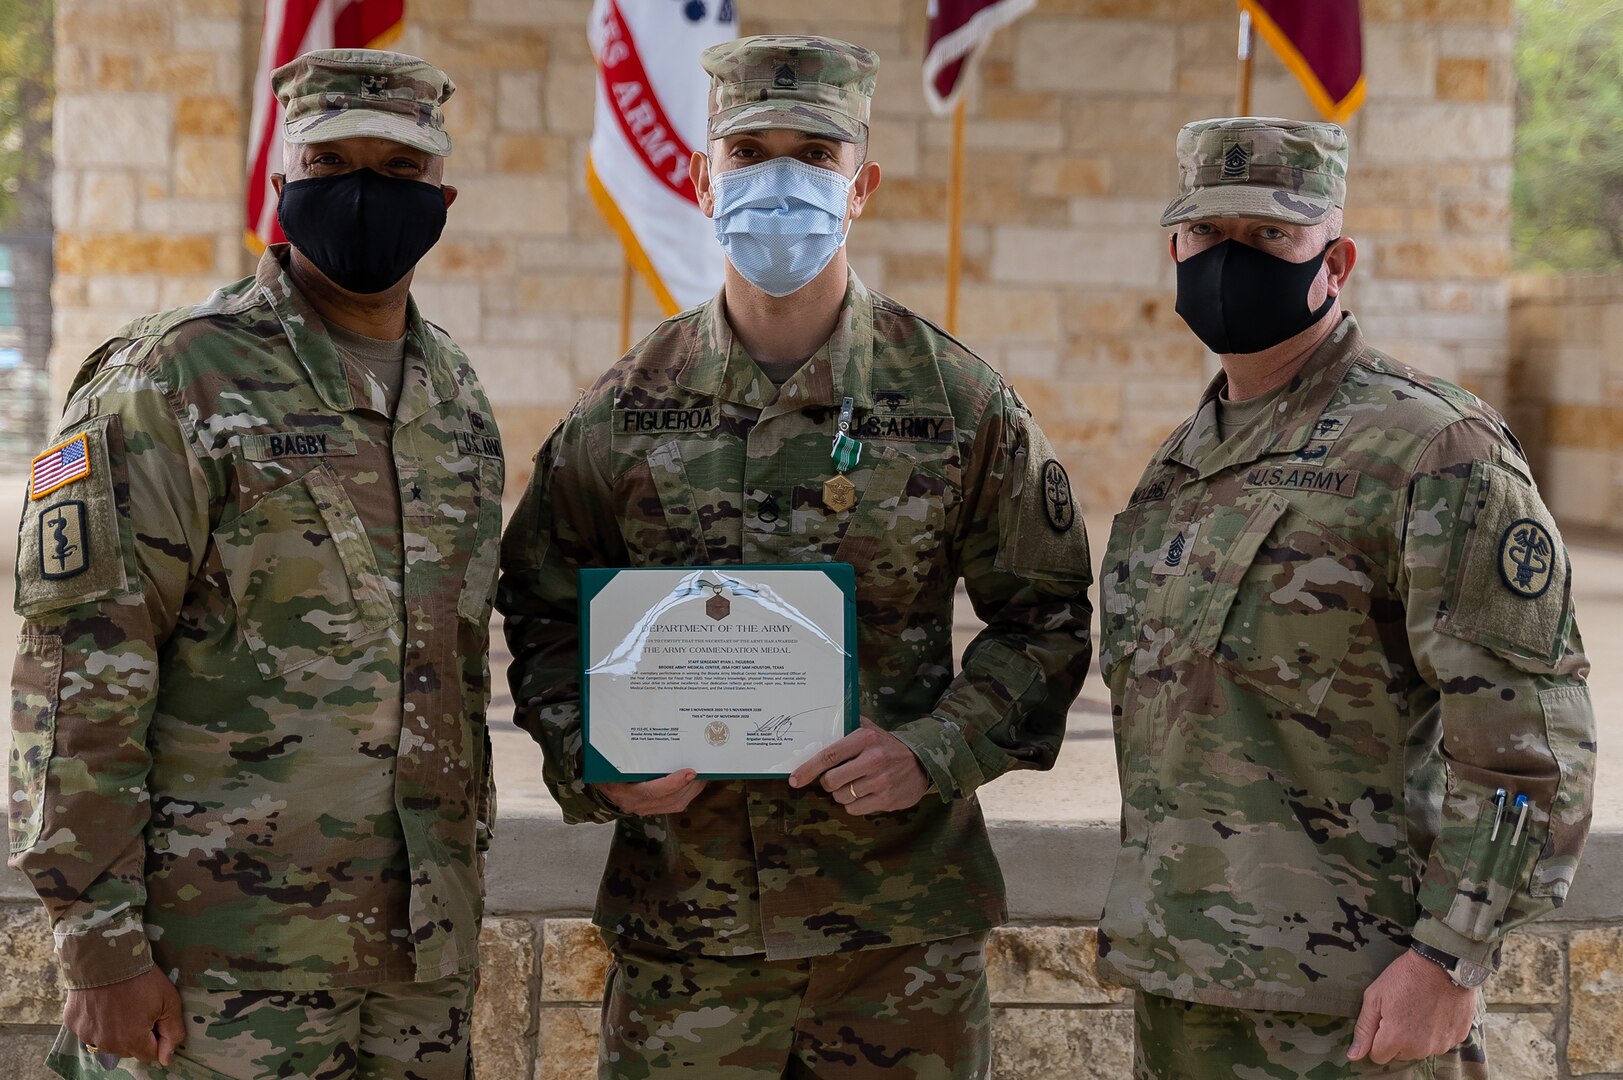 Spc. Pascal Anderson, Company C, Brooke Army Medical Center Troop Command, was named Soldier of the Year for the second year running. Anderson is a radiology specialist at BAMC.